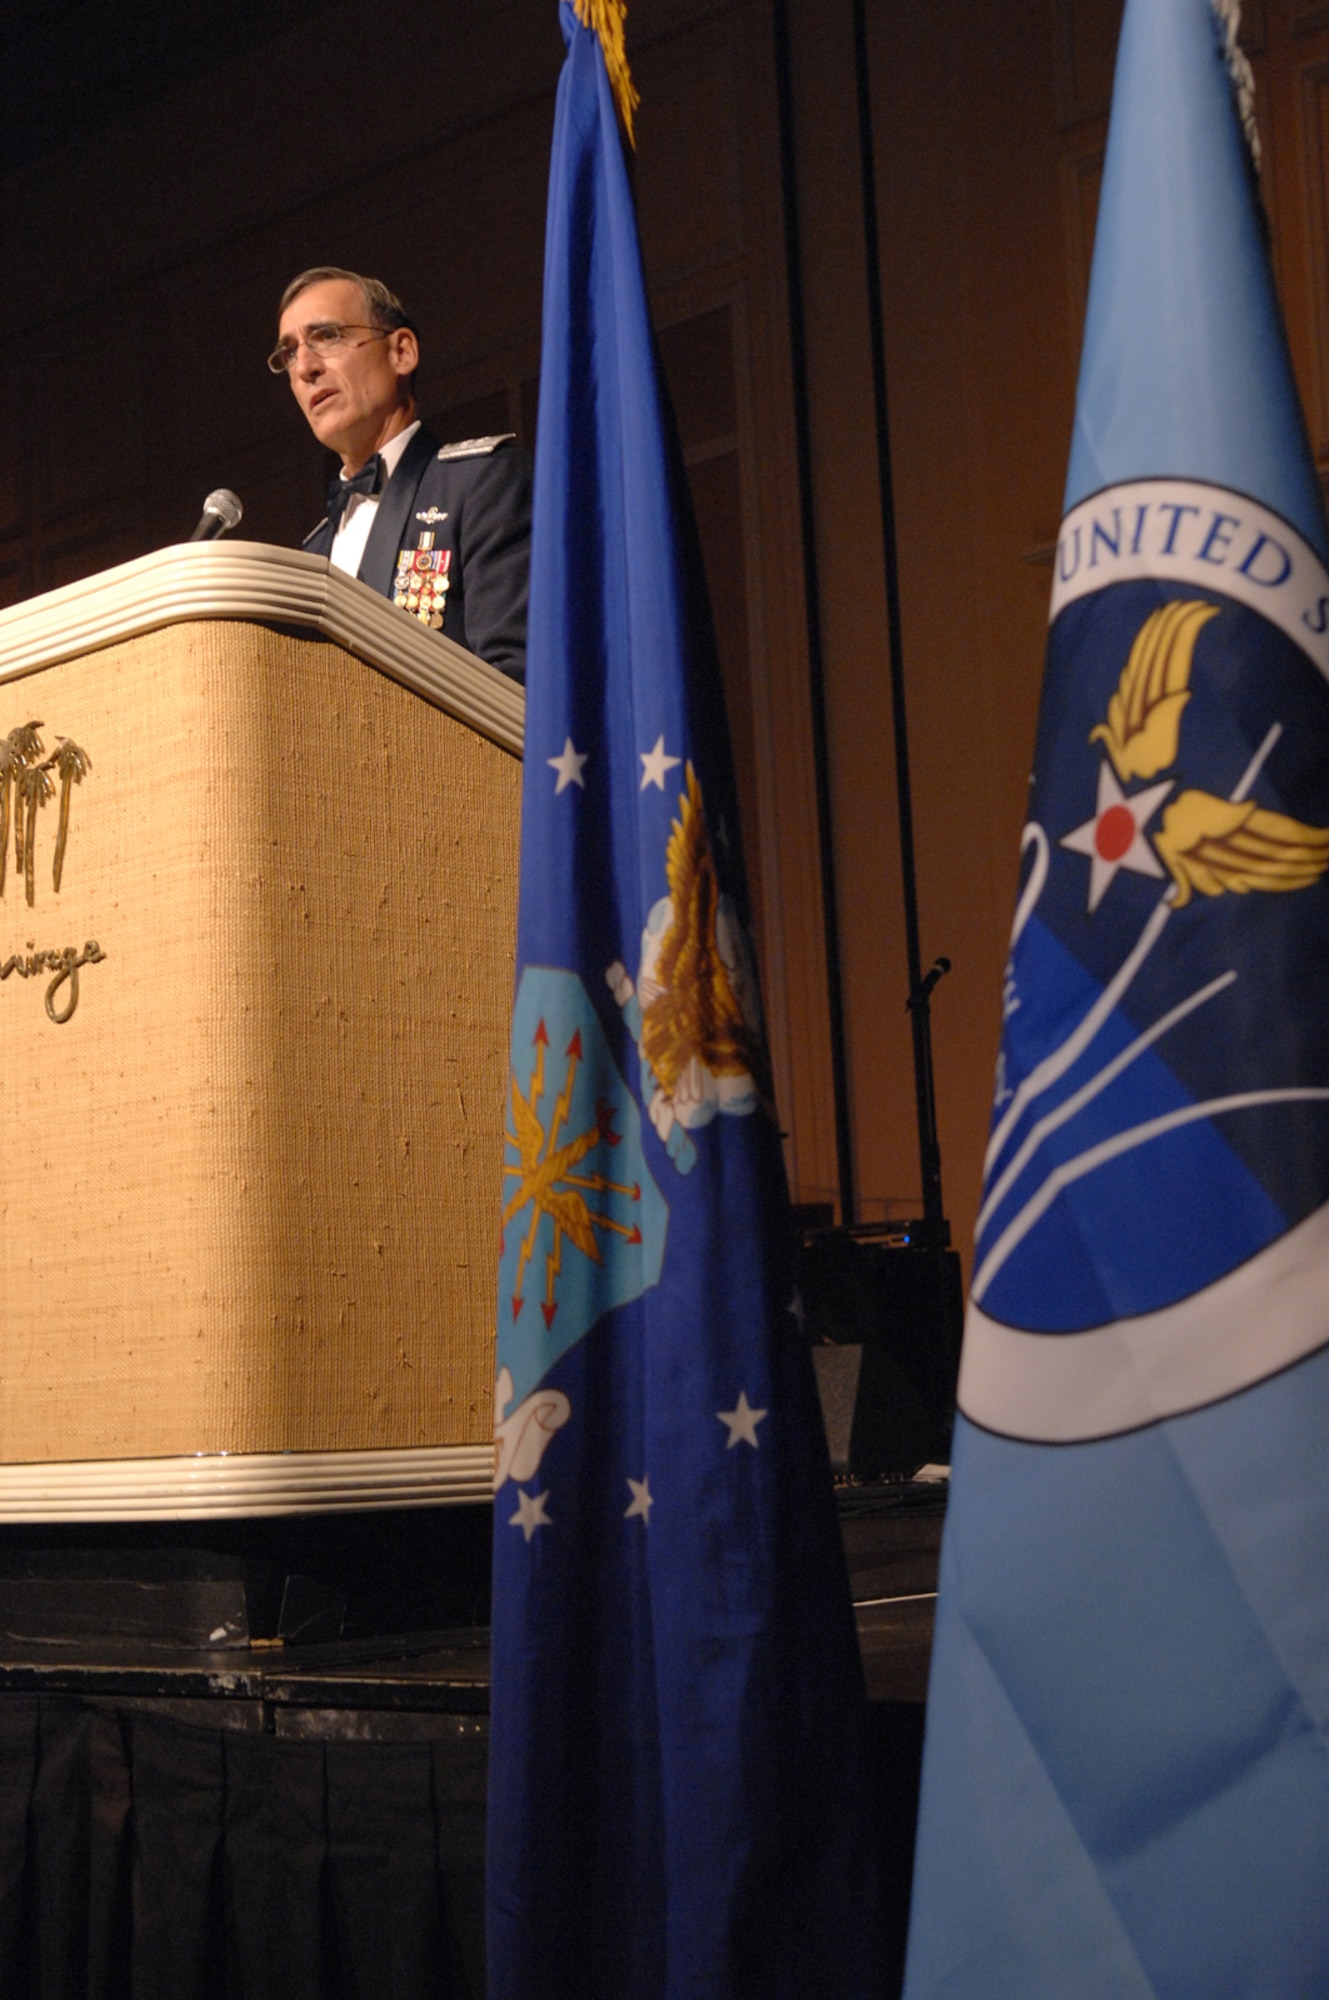 Maj. Gen. Mike Worden, United States Air Force Warfare Center commander, gives closing remarks during the 60th Anniversary Air Force Ball September 8, 2007 at the Mirage Hotel and Casino, Las Vegas, NV.
(U.S. Air Force photo by Senior Airman Larry E. Reid Jr.)